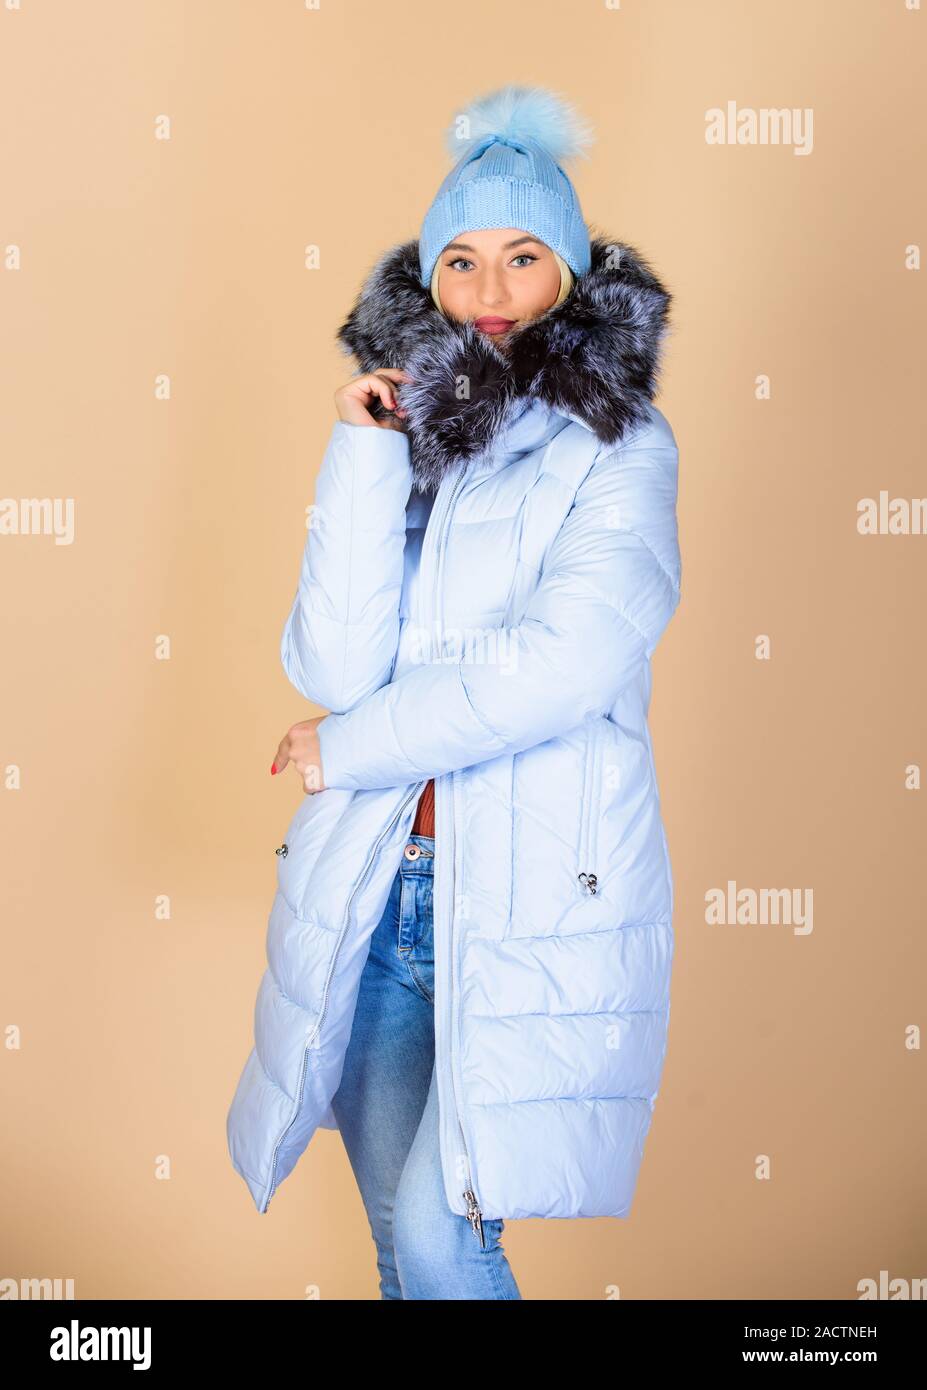 Designed for your comfort. Fashion girl winter clothes. Fashion trend. Fashion  coat. Warming up. Casual winter jacket more stylish have more comfort  features. Female fashion. Clothes shop. Buy online Stock Photo 